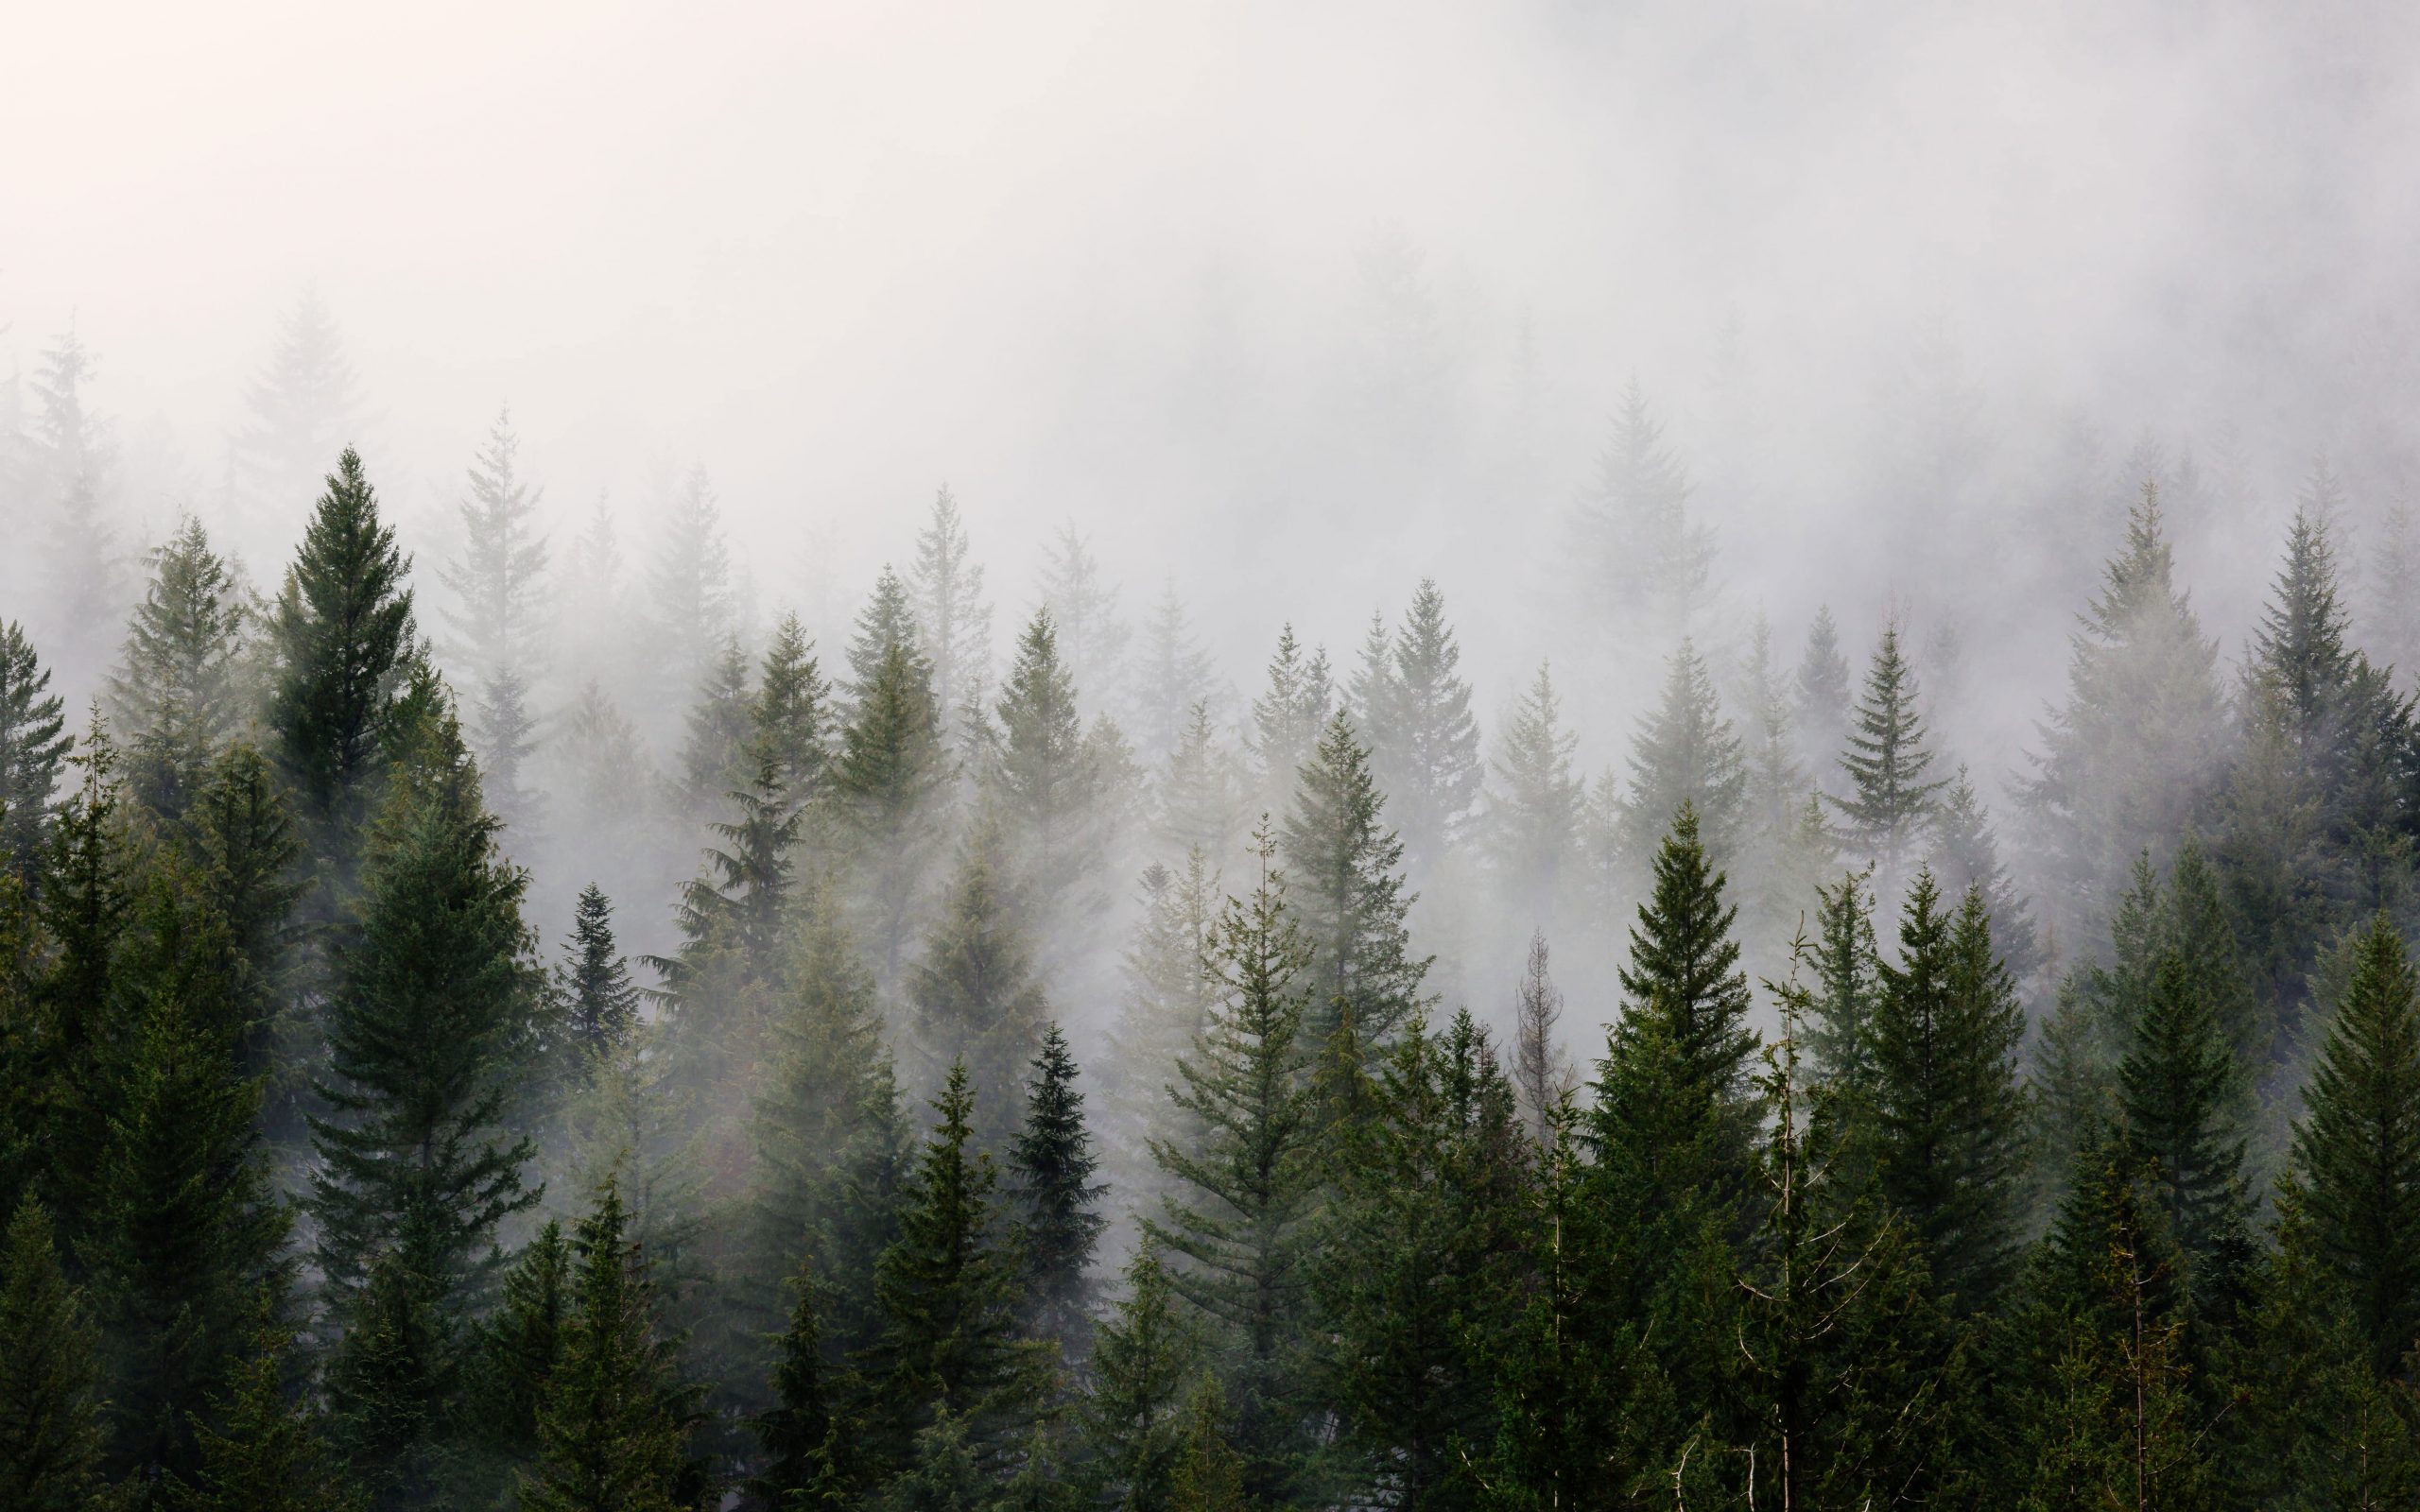 Wallpaper Green Pine Trees With Fog, Pine Trees